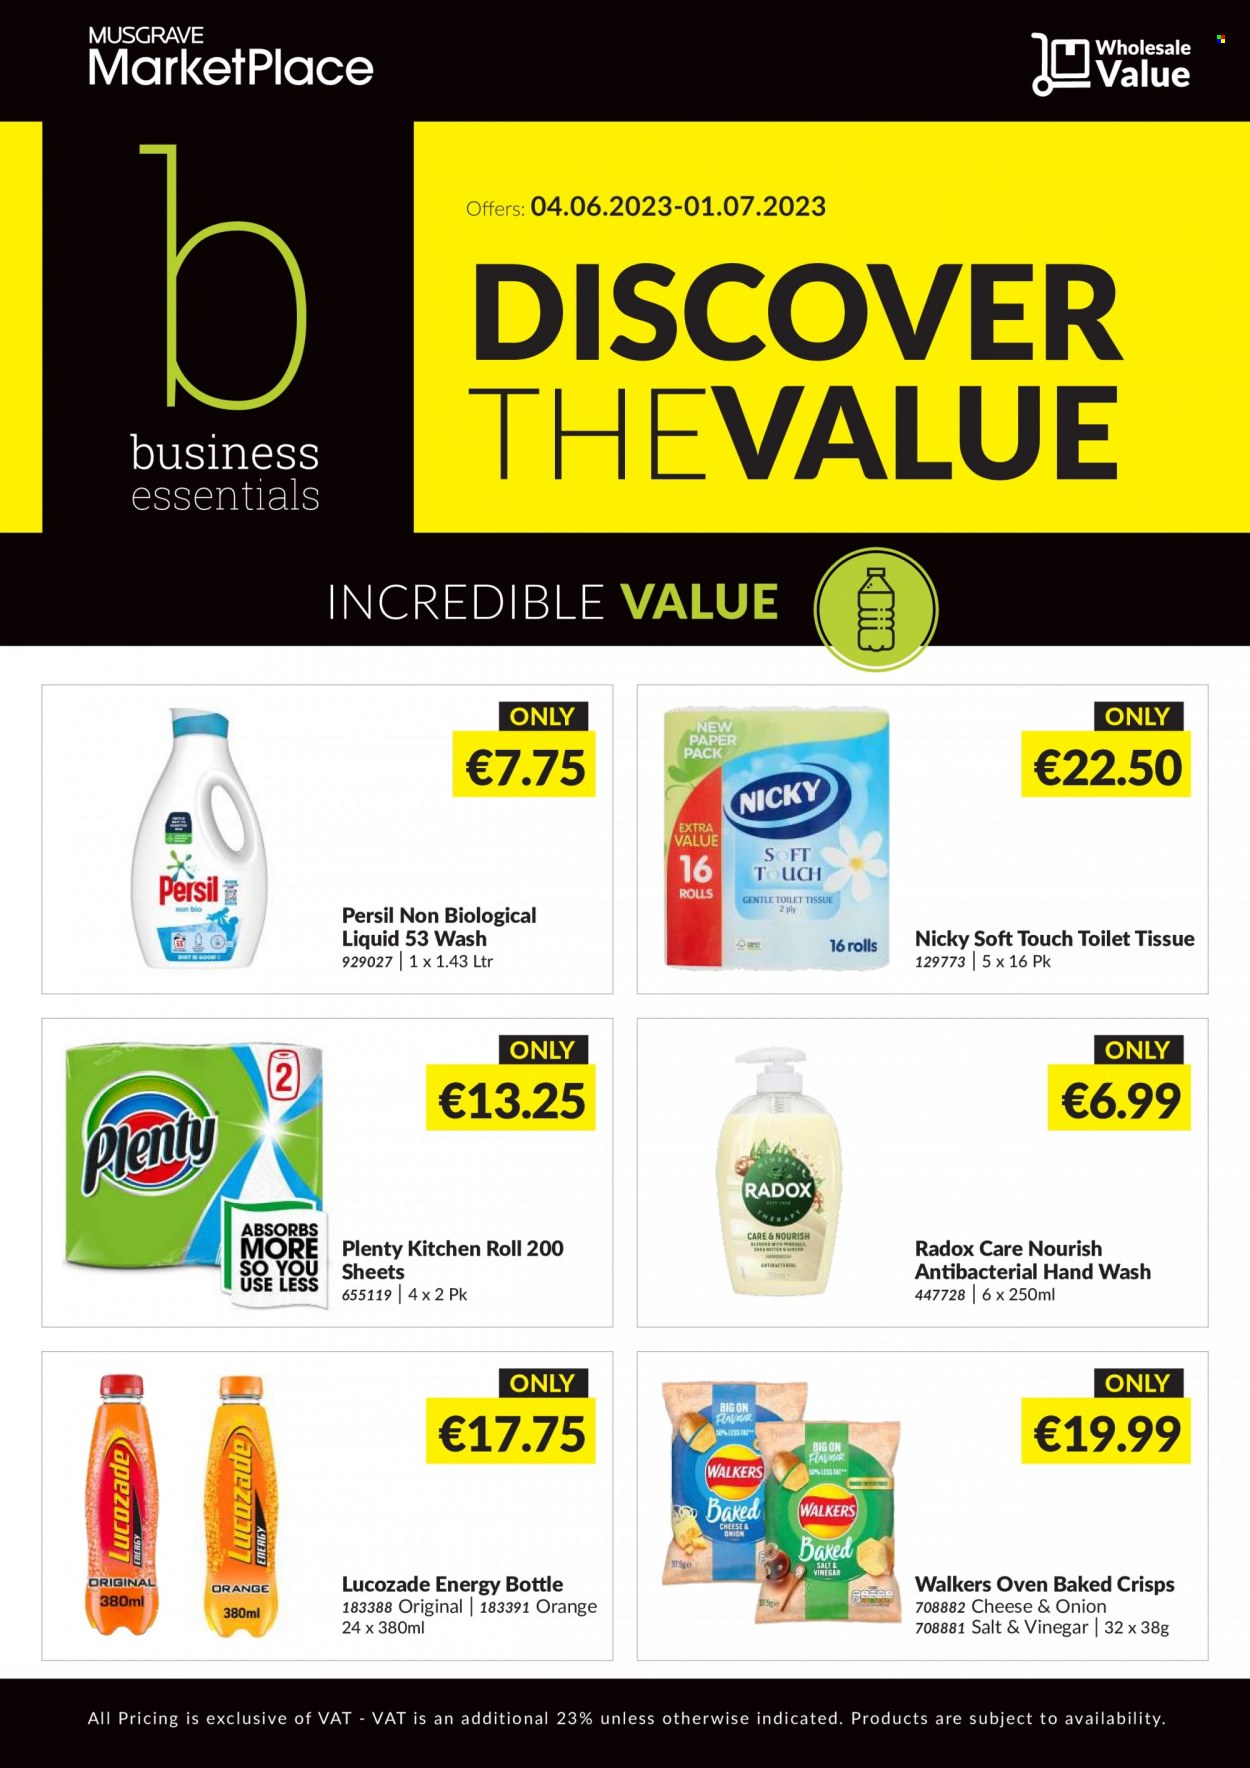 thumbnail - MUSGRAVE Market Place offer  - 04.06.2023 - 01.07.2023 - Sales products - oranges, Lucozade, toilet paper, Plenty, Persil, hand wash, Radox, antibacterial hand wash, kitchen rolls, paper. Page 1.